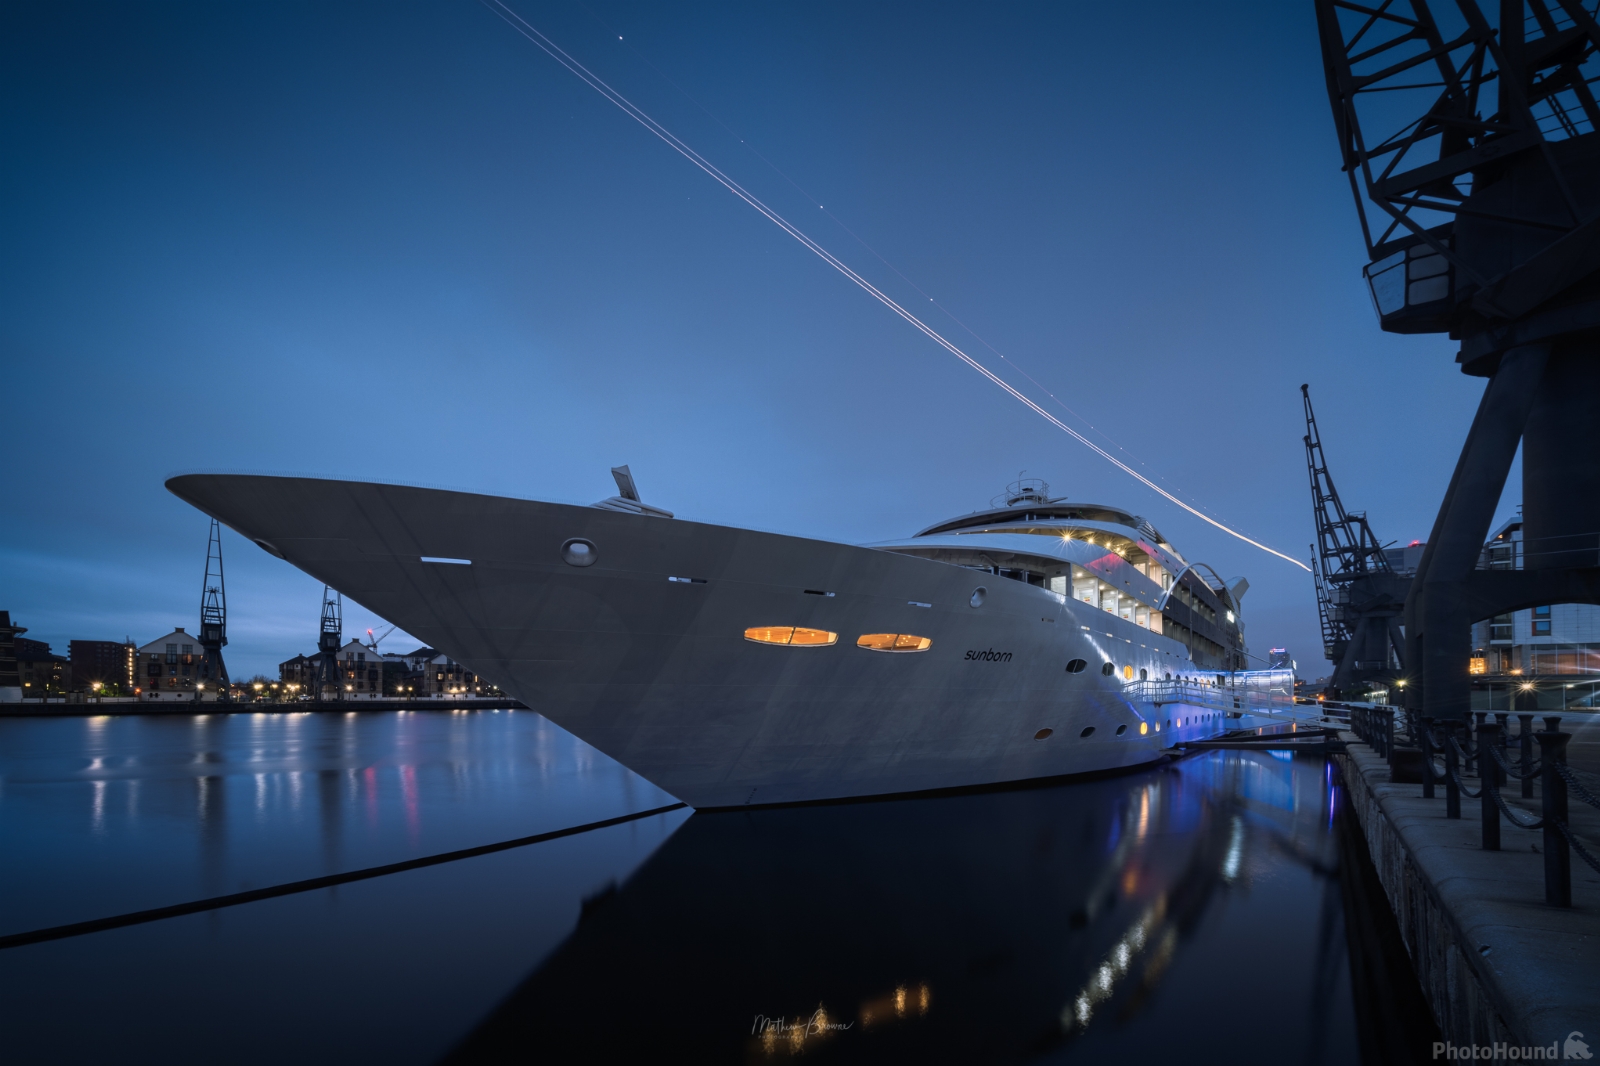 Image of Sunborn Yacht by Mathew Browne